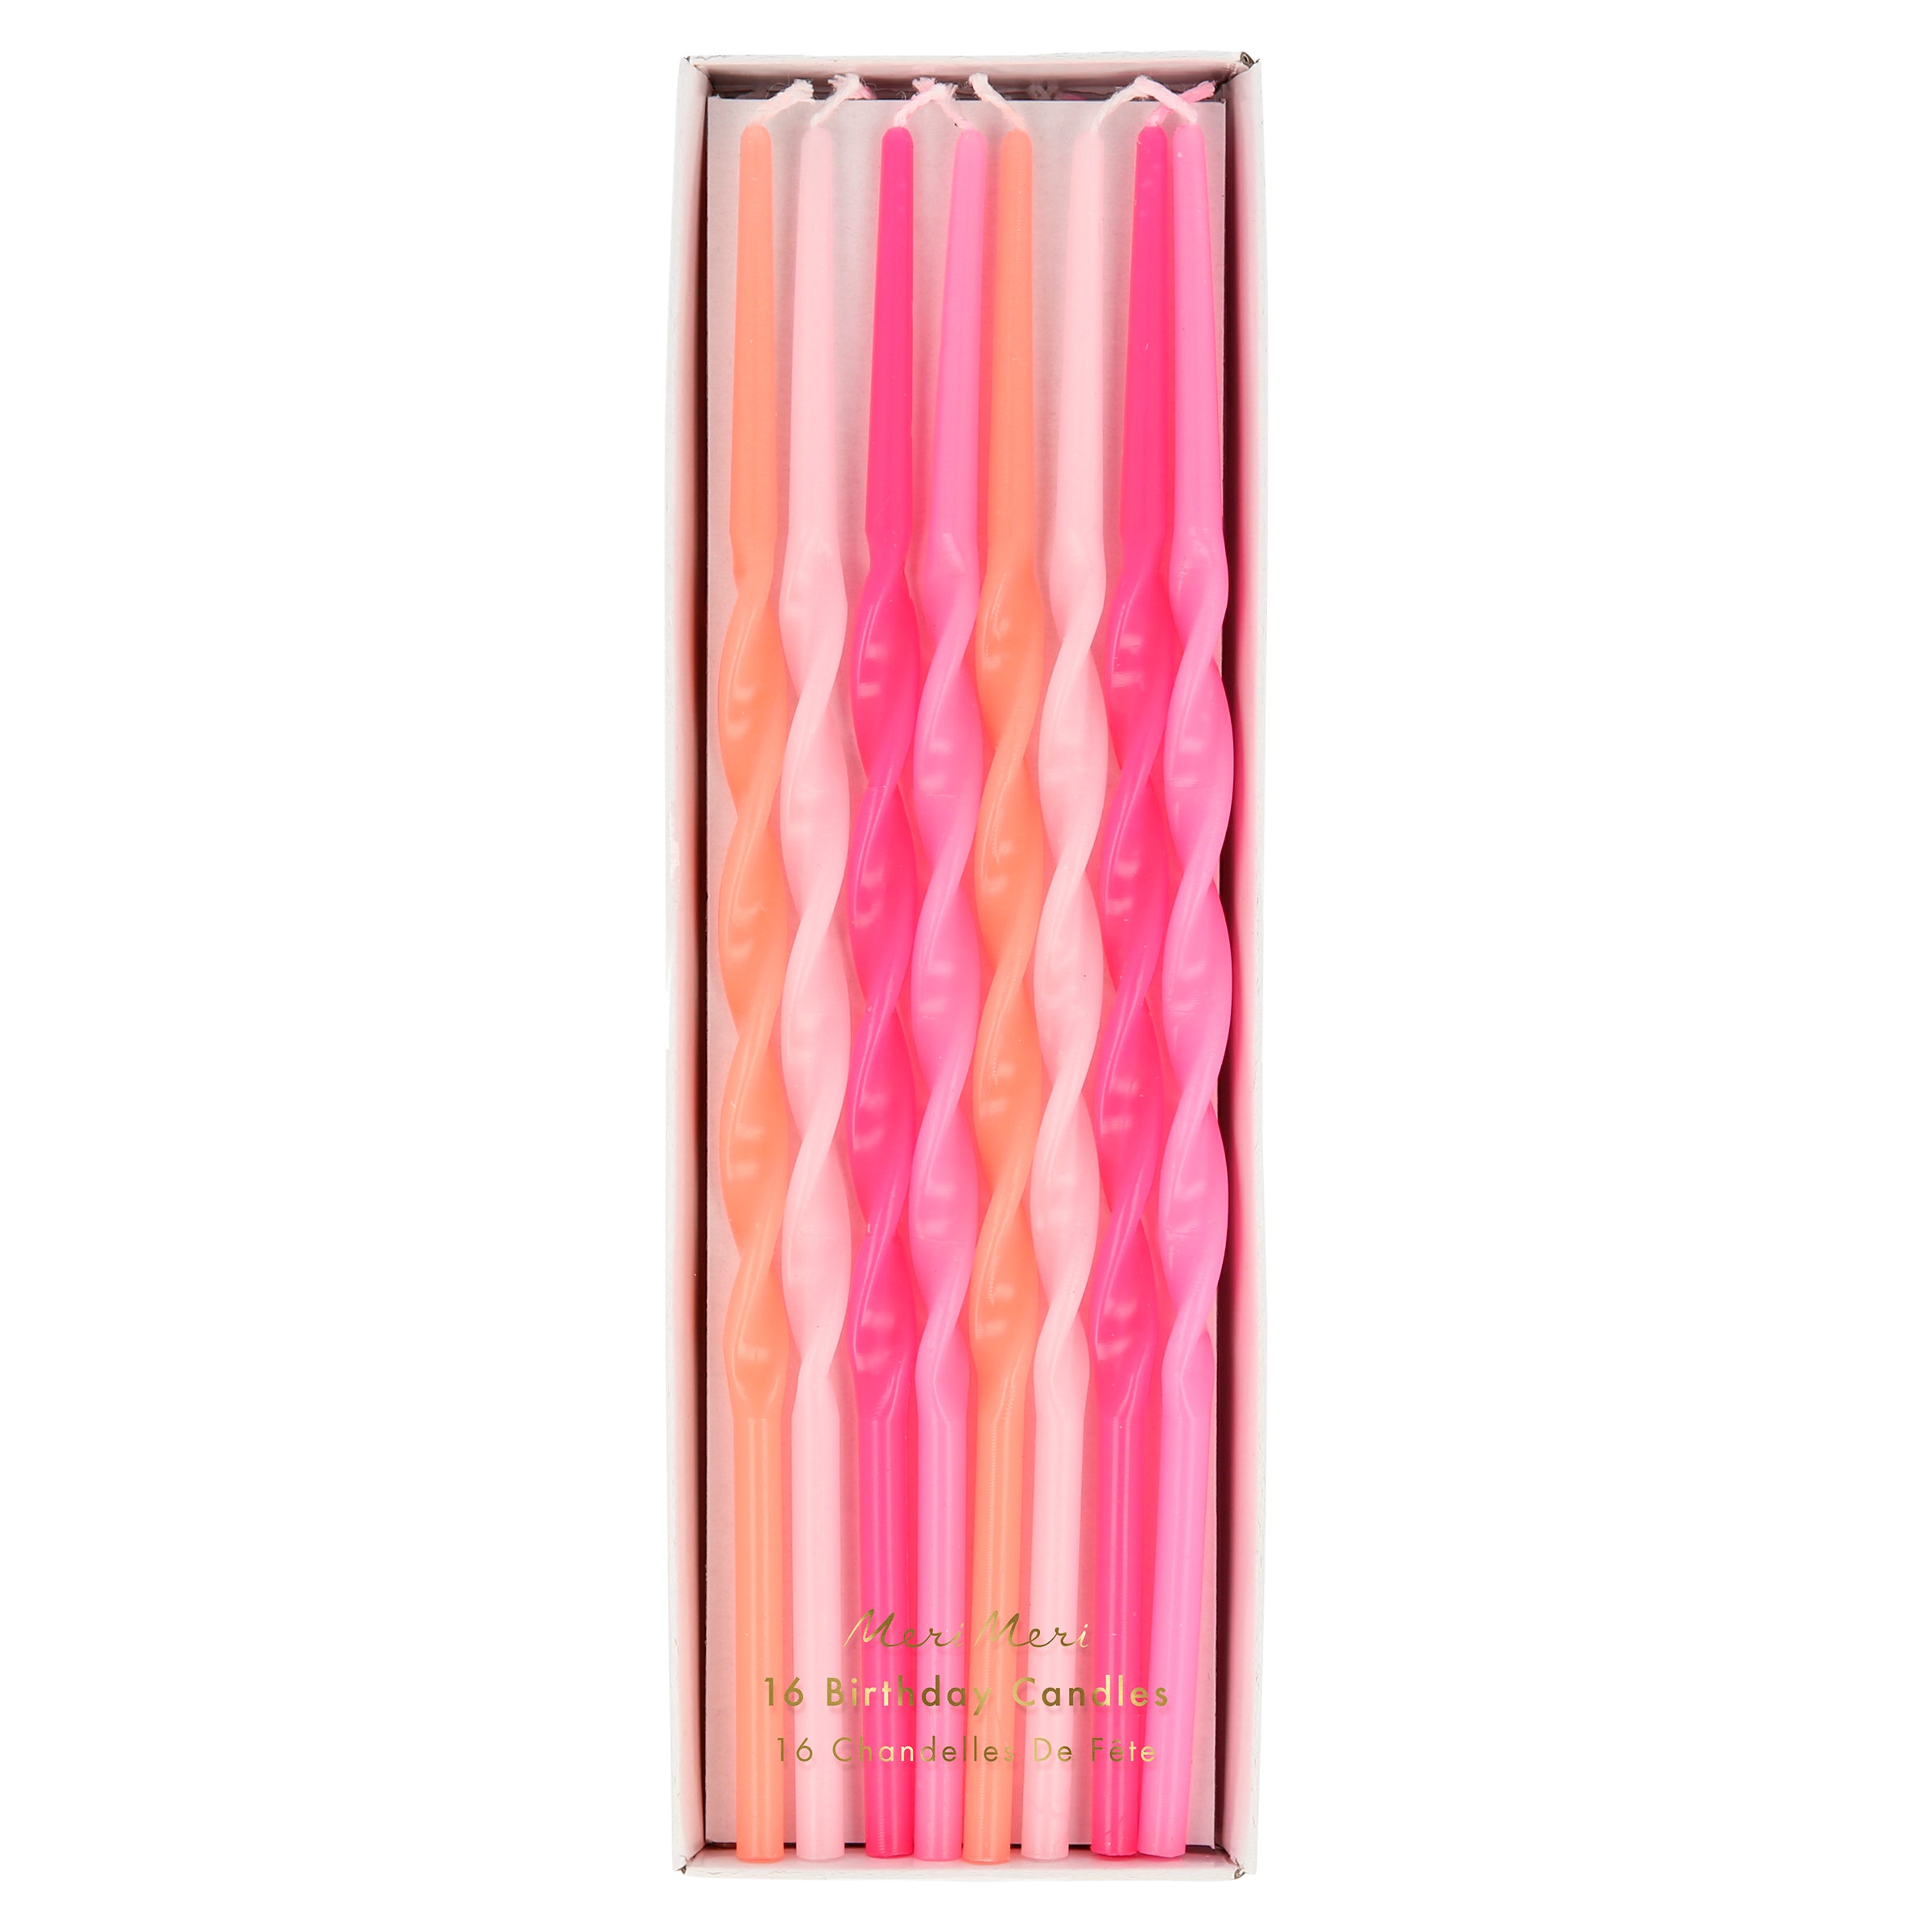 Our tall candles, with a special twisted shape, are perfect for a pink theme party, an engagement party or a baby shower.